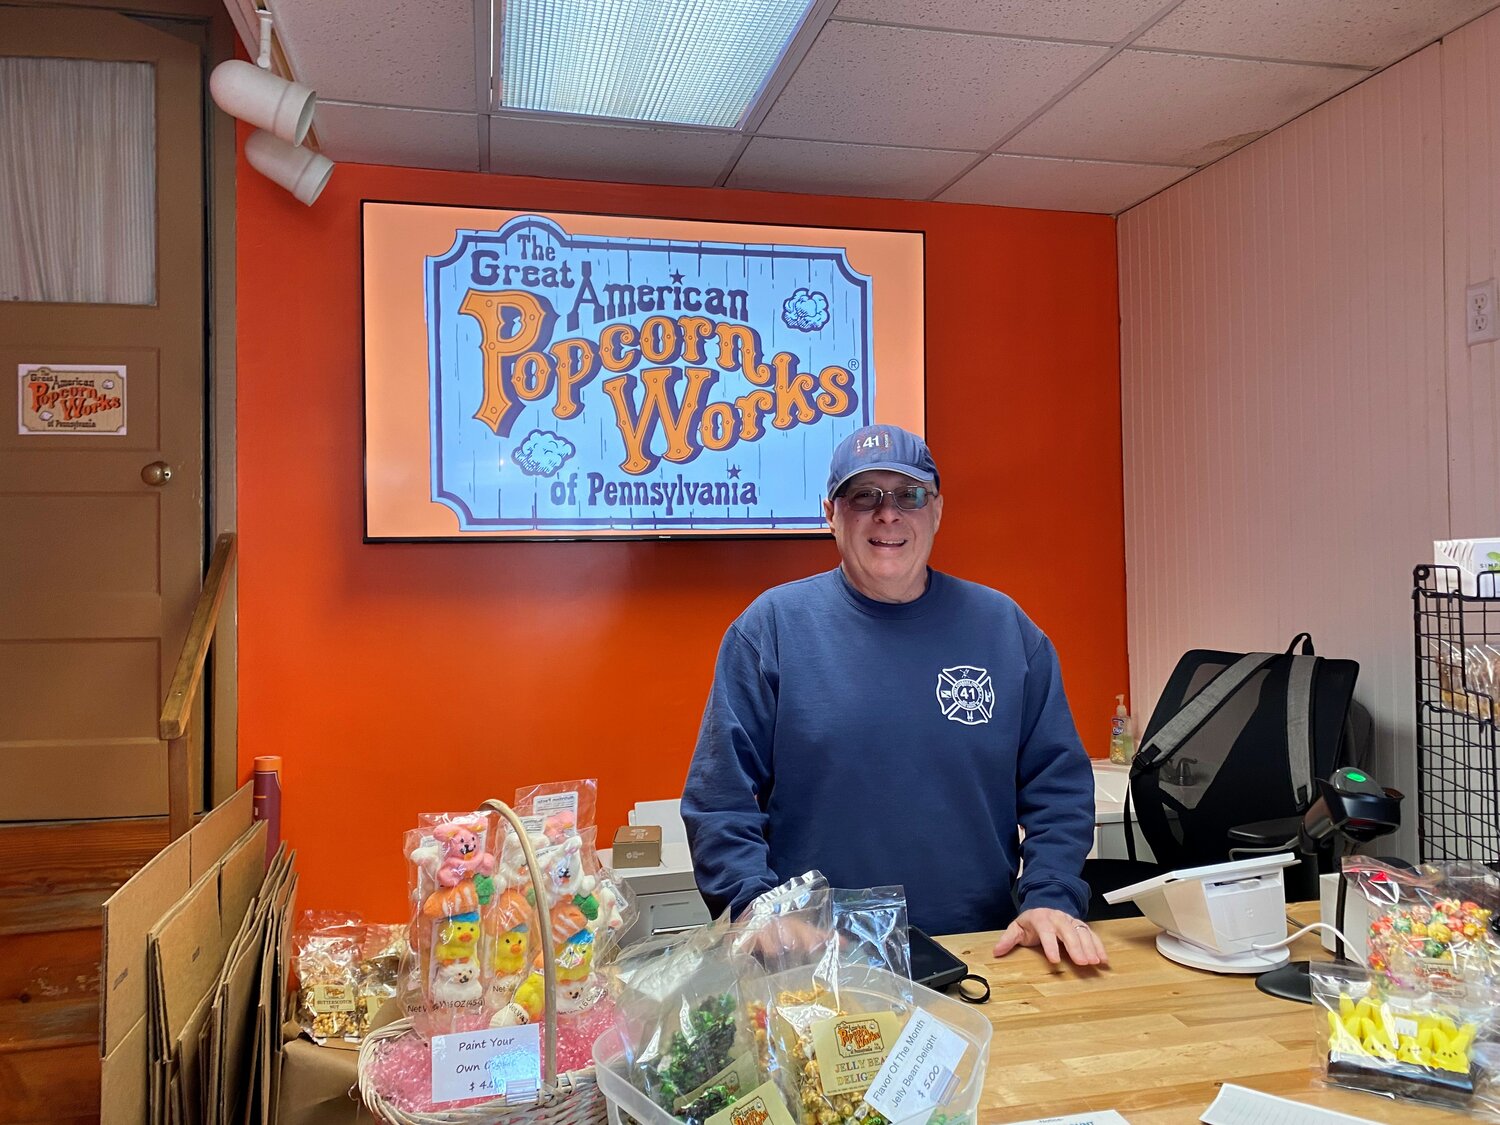 Scott Fleischer just opened The Great American Popcorn Works with his twin brother Steve in Doylestown Borough. It’s the business' second location. The first is in Telford.